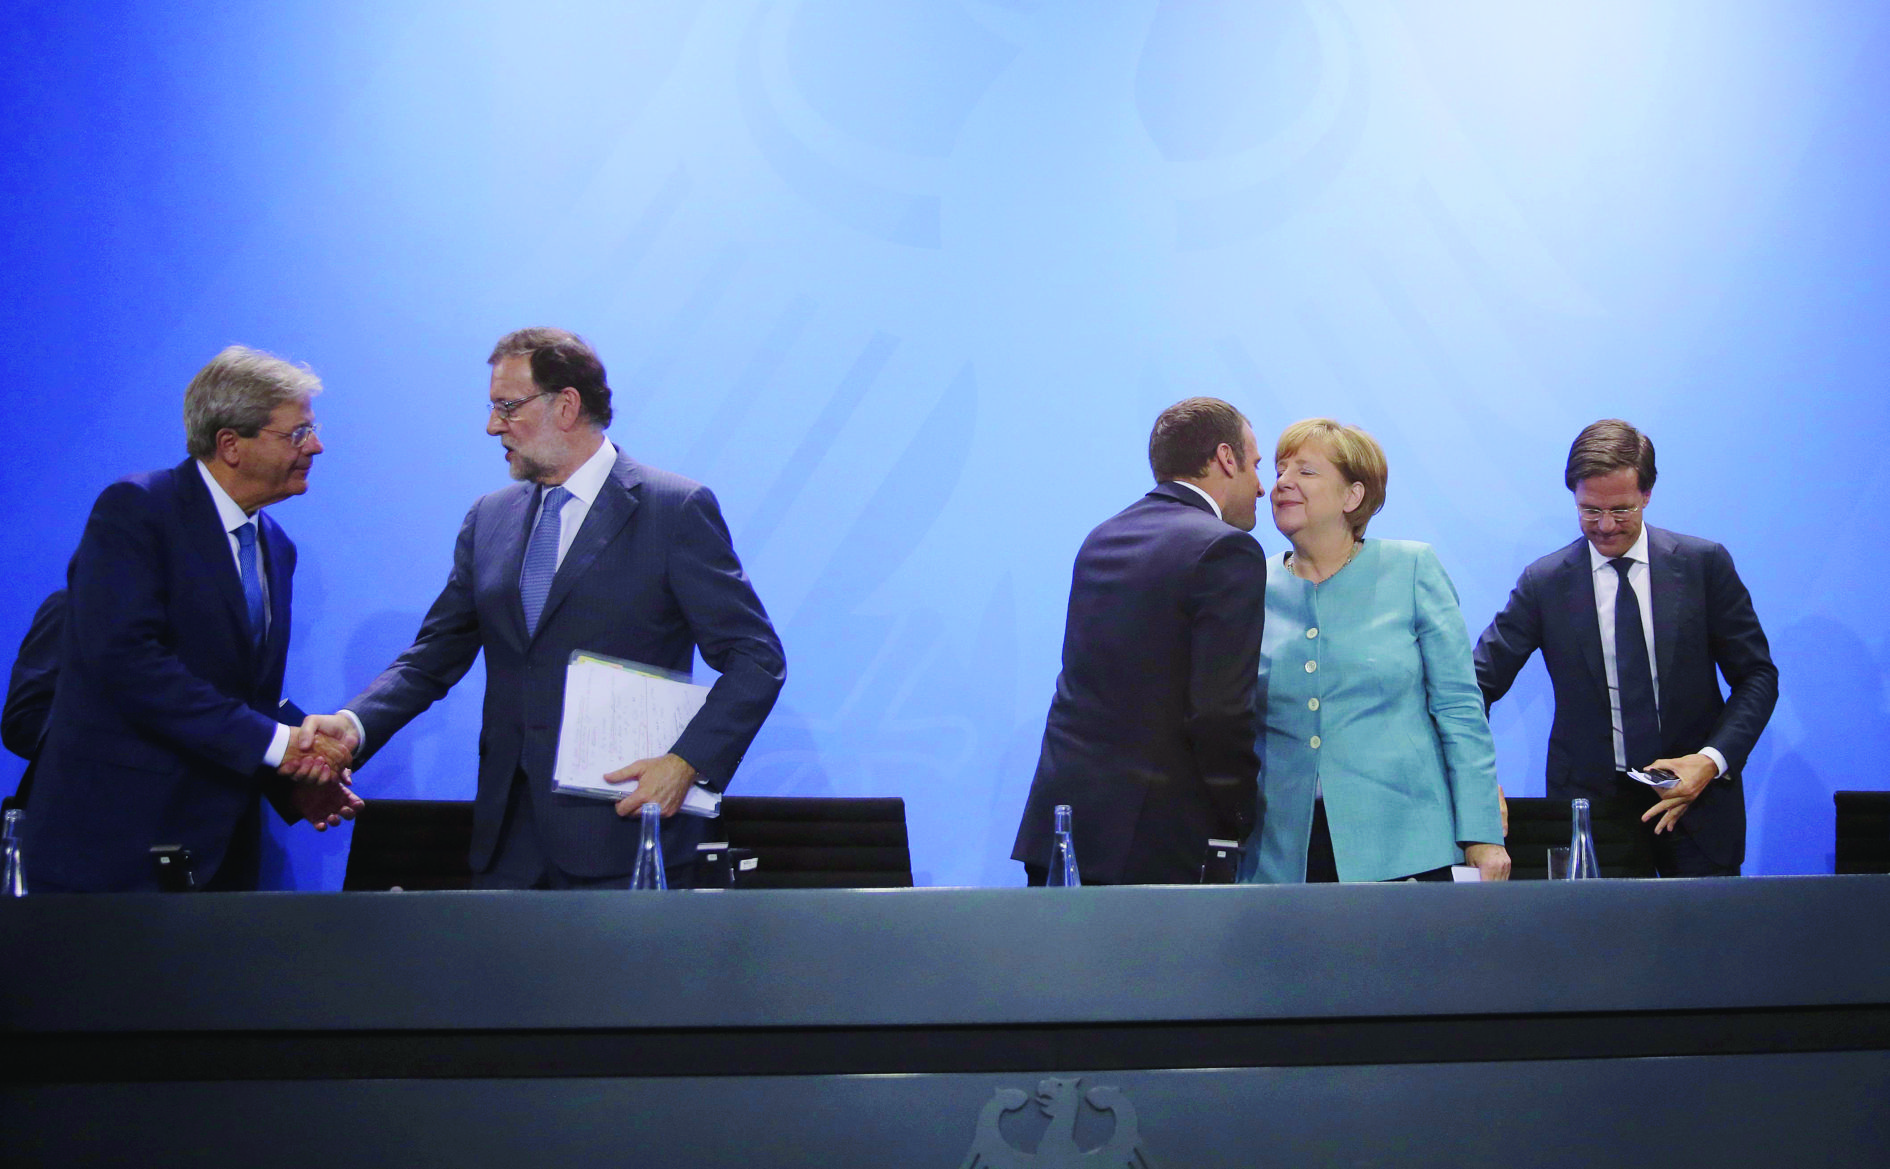 Italian Prime Minister Paolo Gentiloni, Spain's Prime Minister Mariano Rajoy, France's President Emmanuel Macron, German Chancellor Angela Merkel and Mark Rutte, Prime Minister of the Netherlands, from left, leave after a press conference after a gathering of European leaders on the upcoming G-20 summit in the chancellery in Berlin, Germany, Thursday, June 29, 2017. (AP Photo/Markus Schreiber) Germany G20